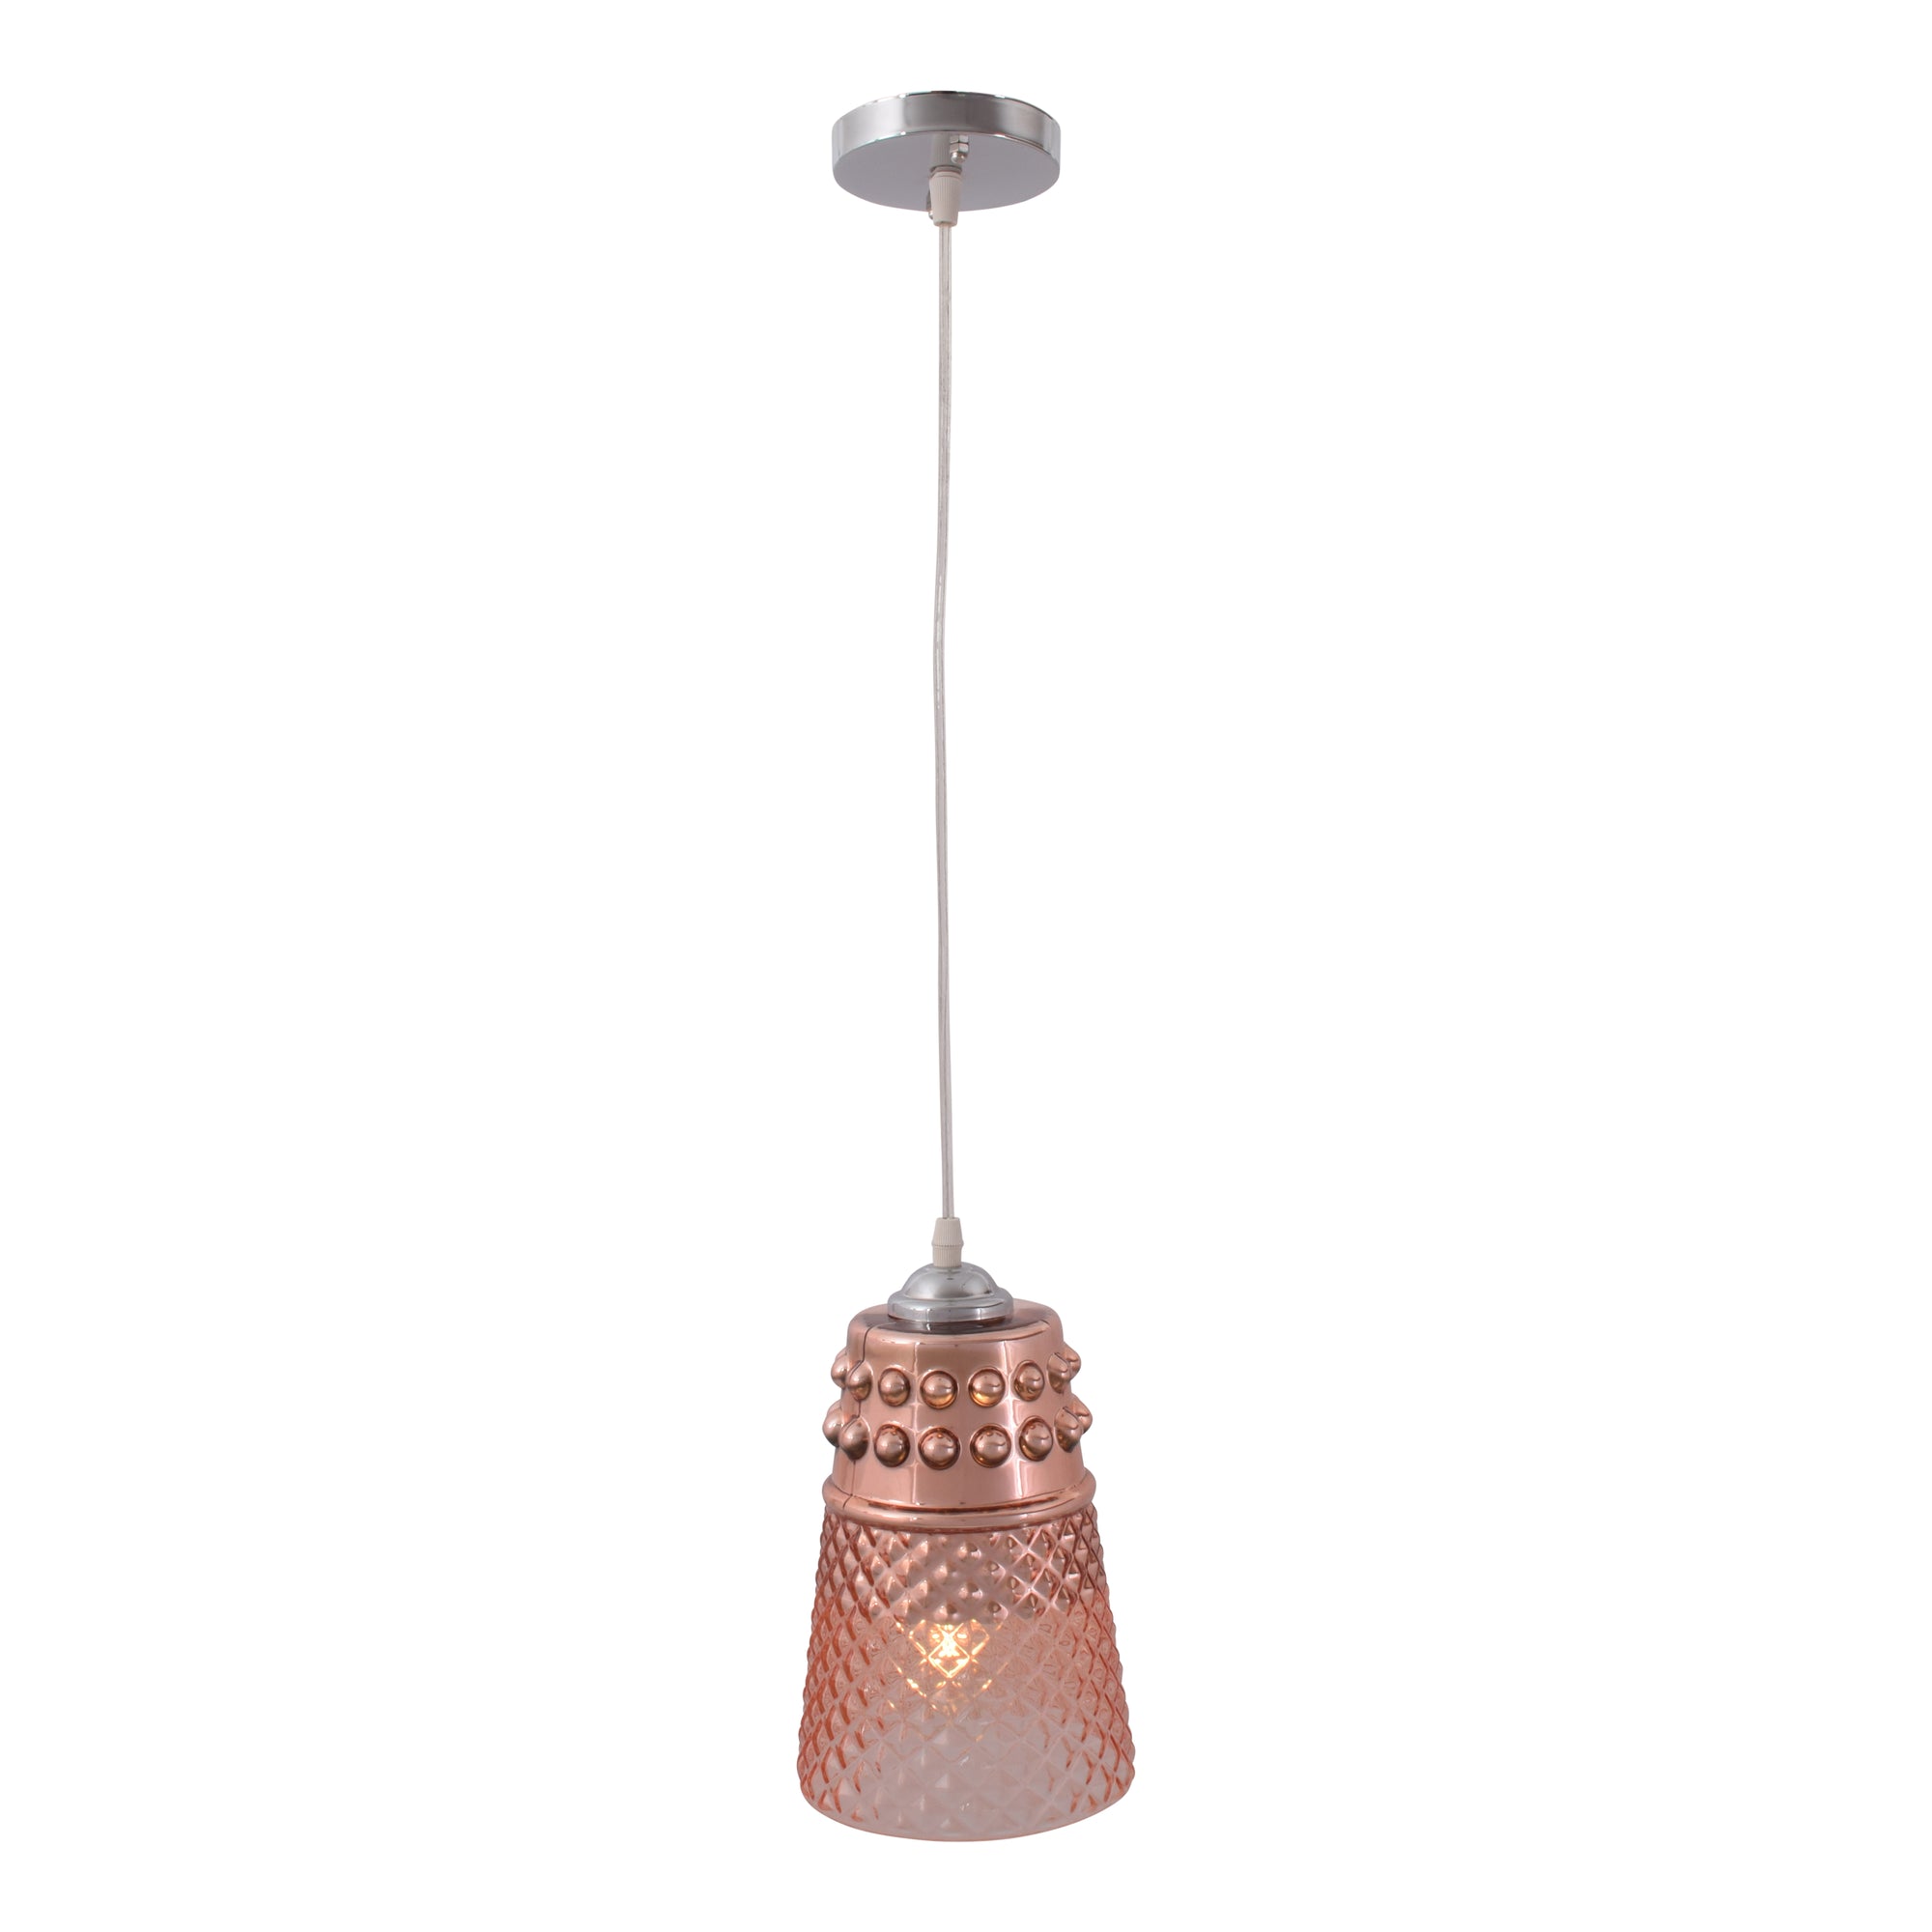 Come out of your Shell Pendant Light